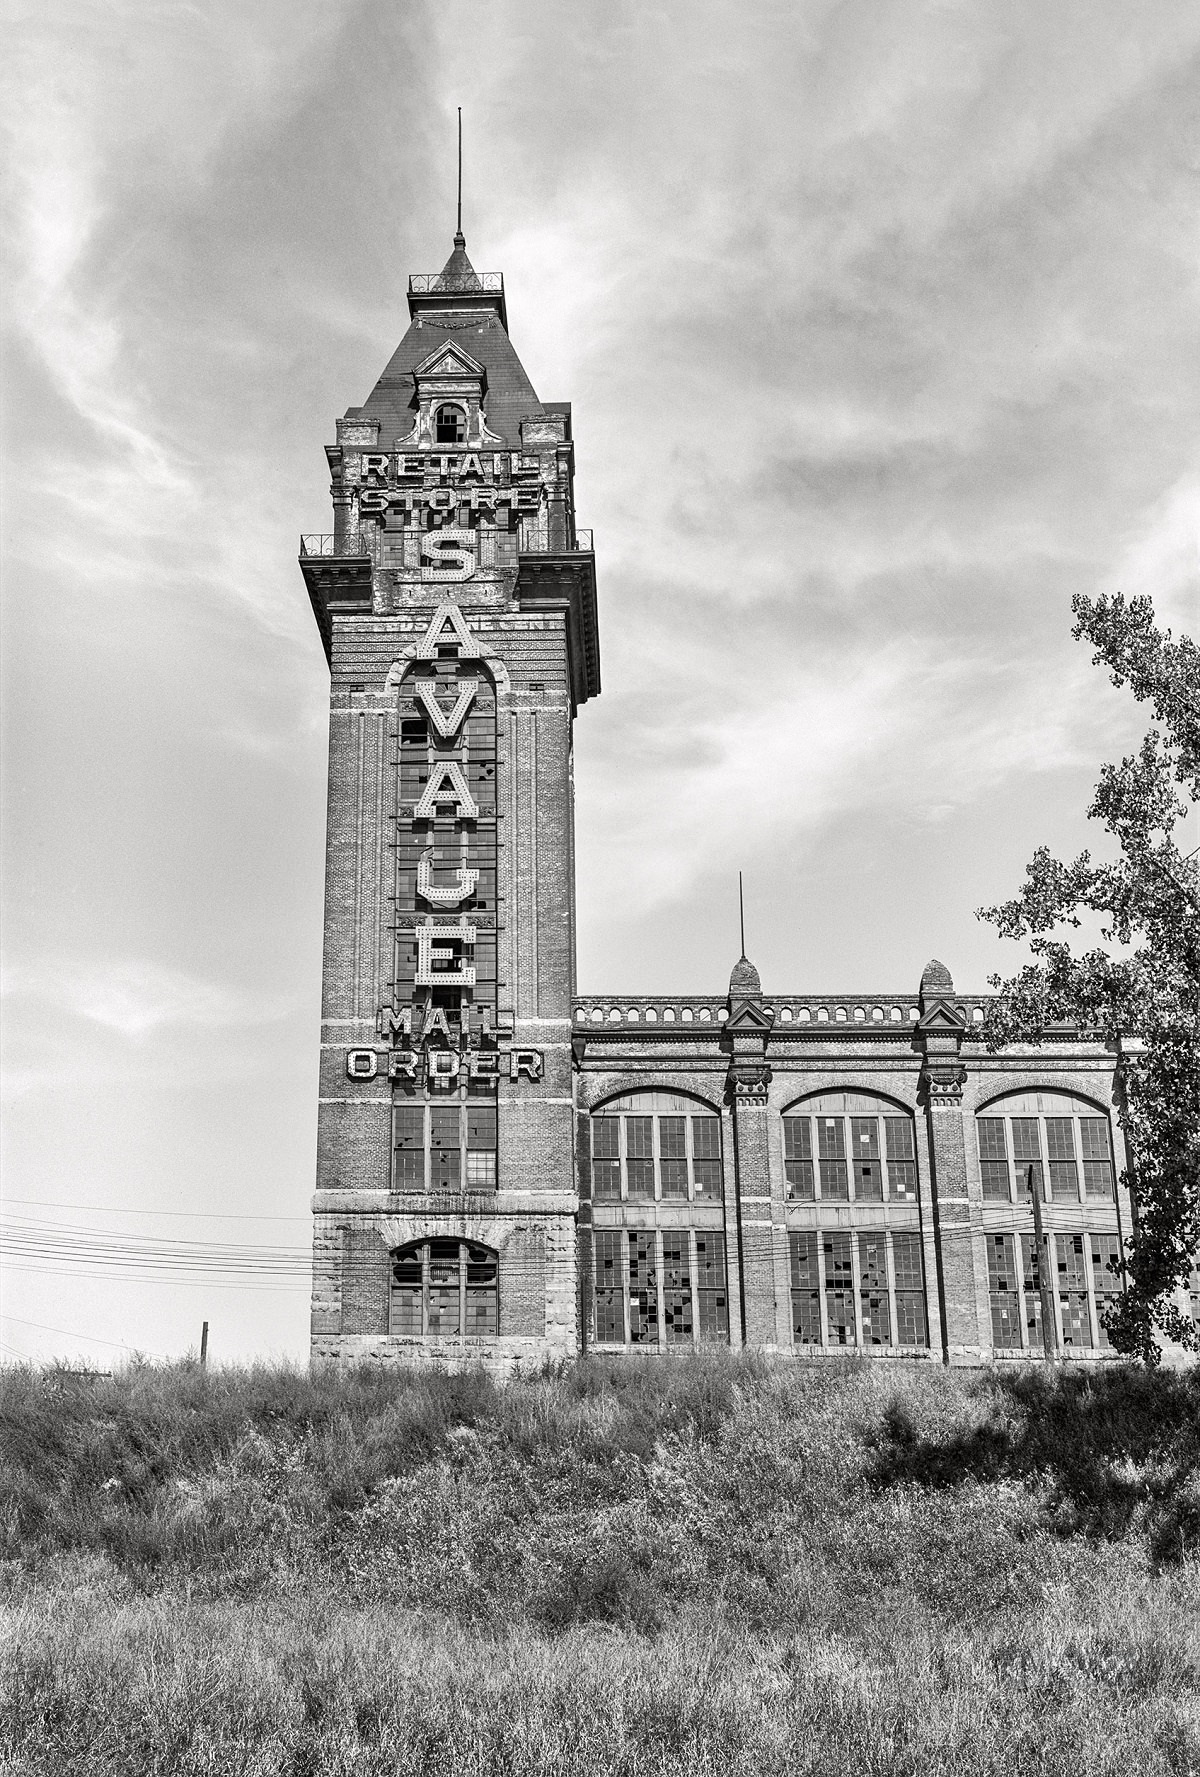 The former Minneapolis Exposition Hall, demolished in 1940.